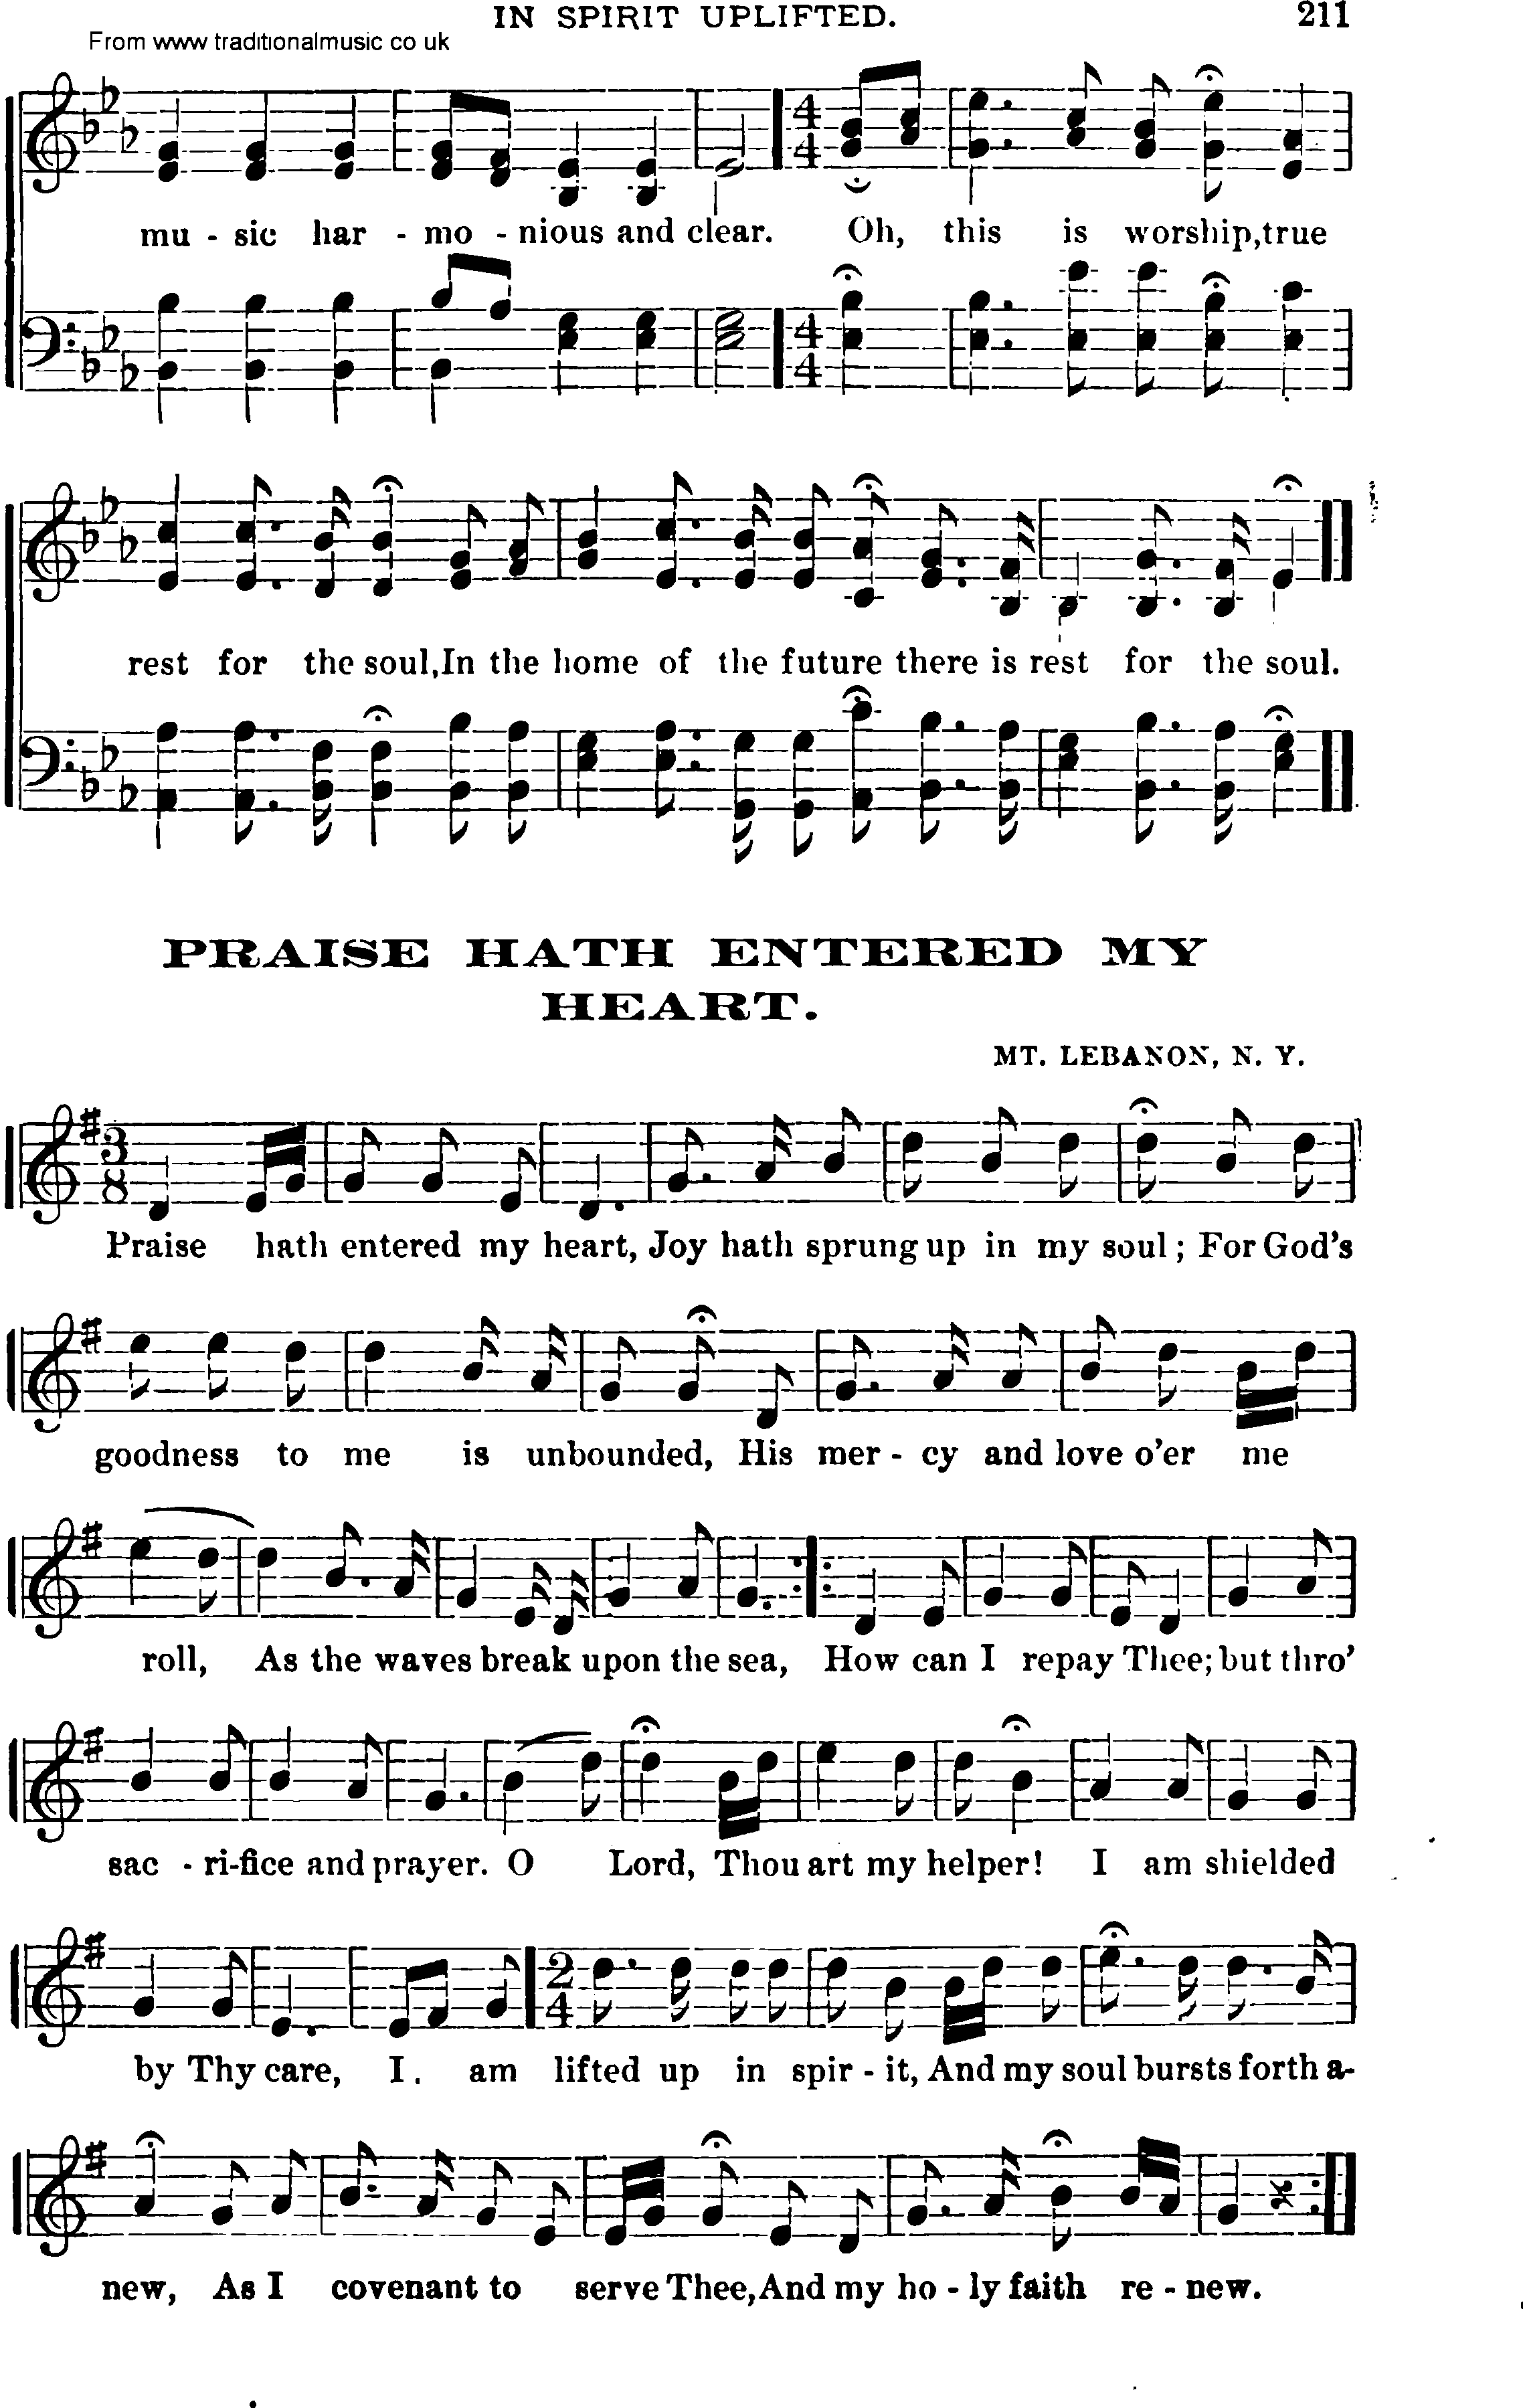 Shaker Music collection, Hymn: Praise Hath Entered My Heart, sheetmusic and PDF